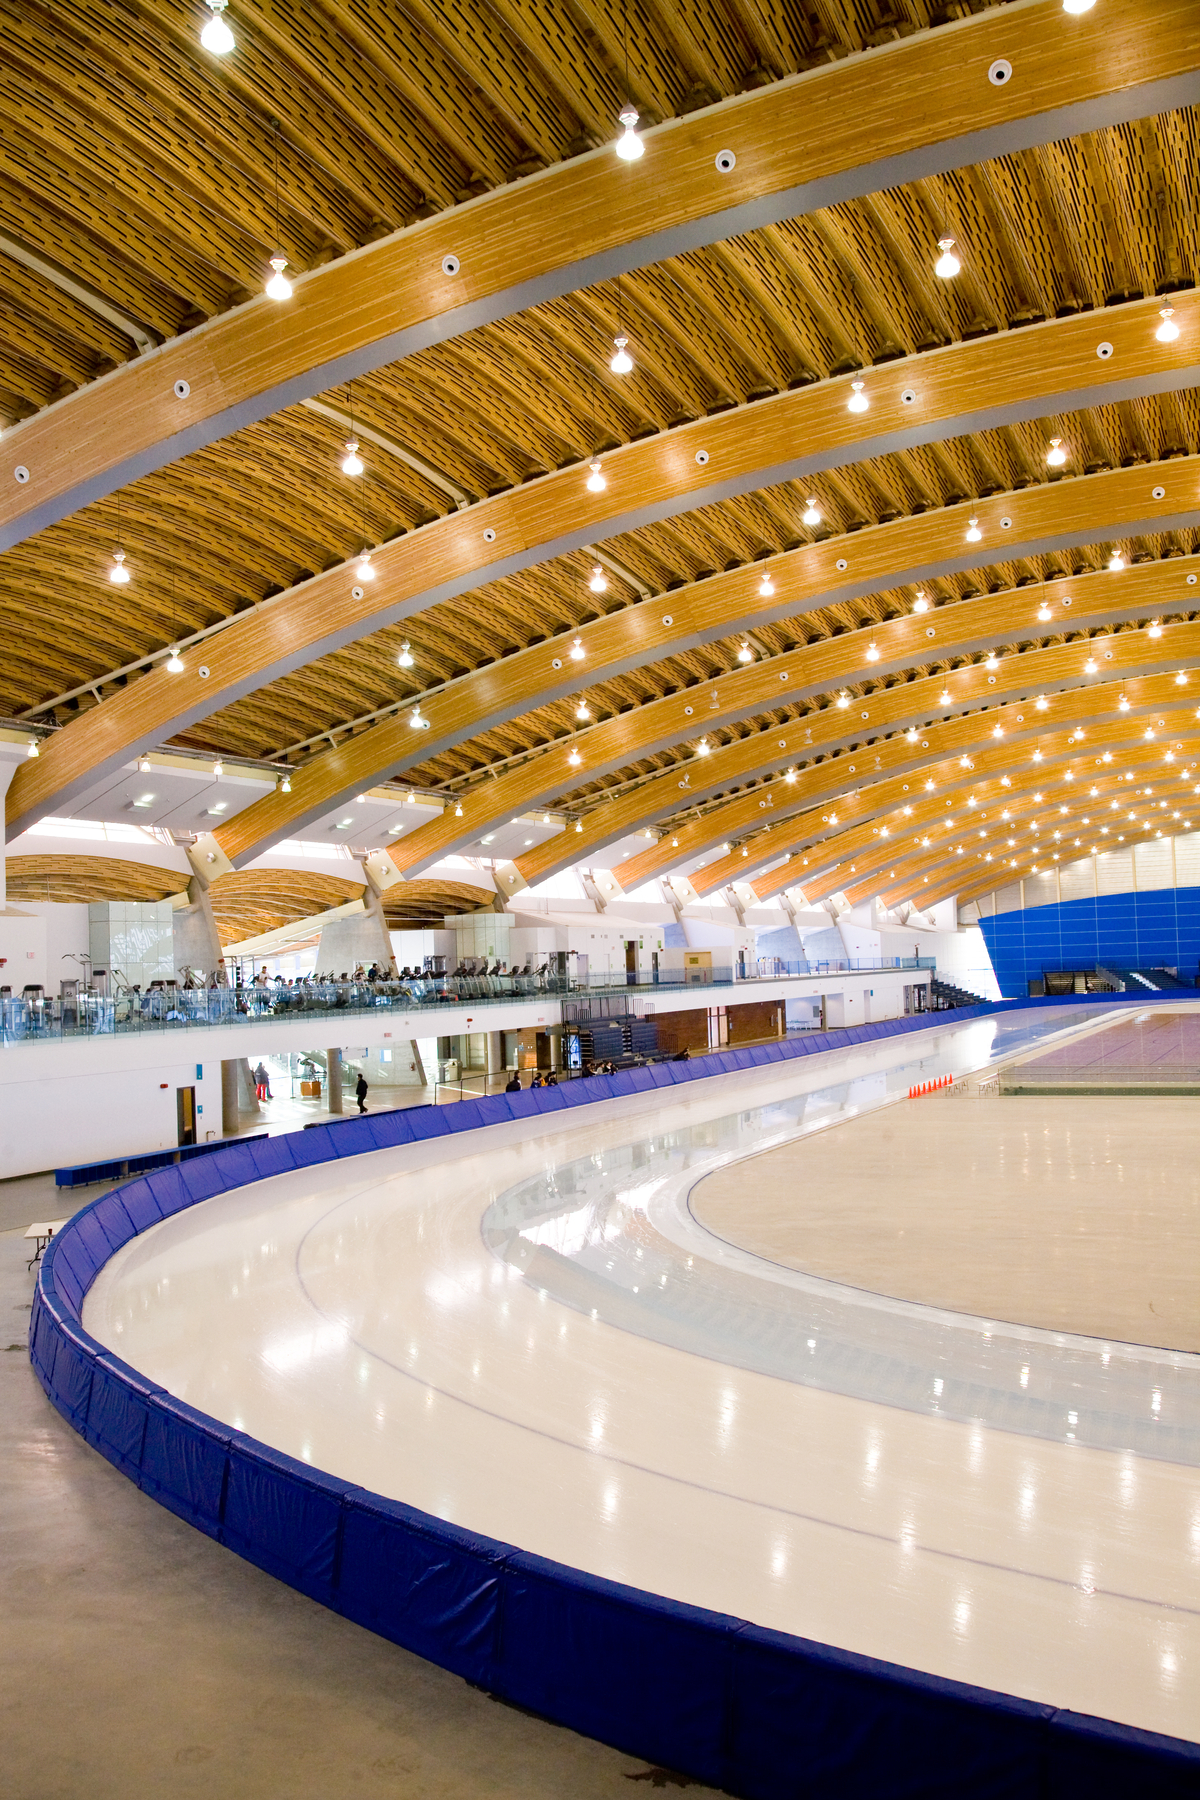 Daytime interior image of the Richmond Olympic Oval which features one of the largest wood roof spans in the world, fabricated with hybrid glue-laminated (glulam) timber-steel arches and 452 WoodWave panels that used wood salvaged from pine beetle-killed forests